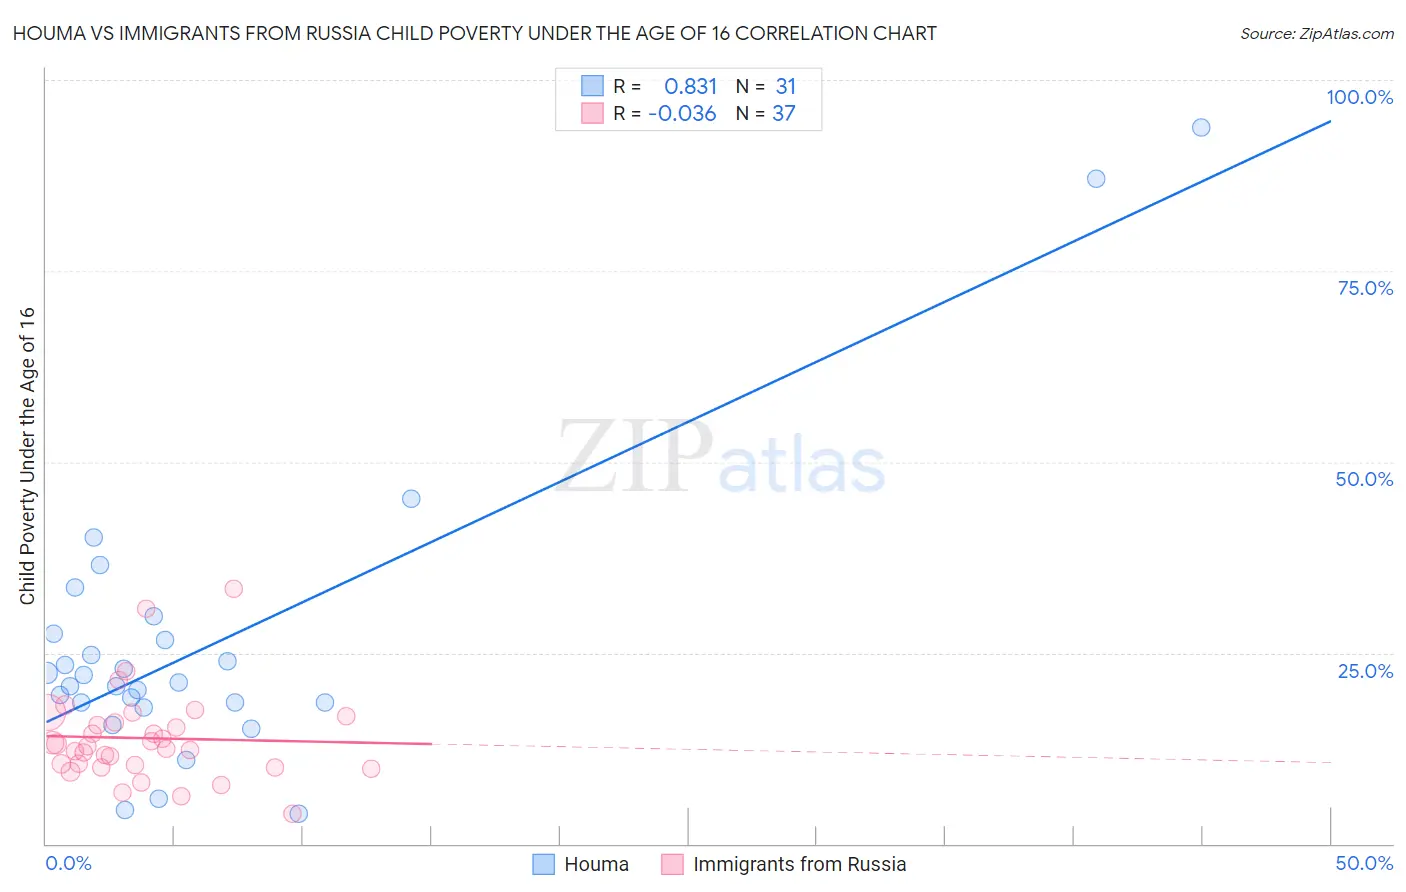 Houma vs Immigrants from Russia Child Poverty Under the Age of 16